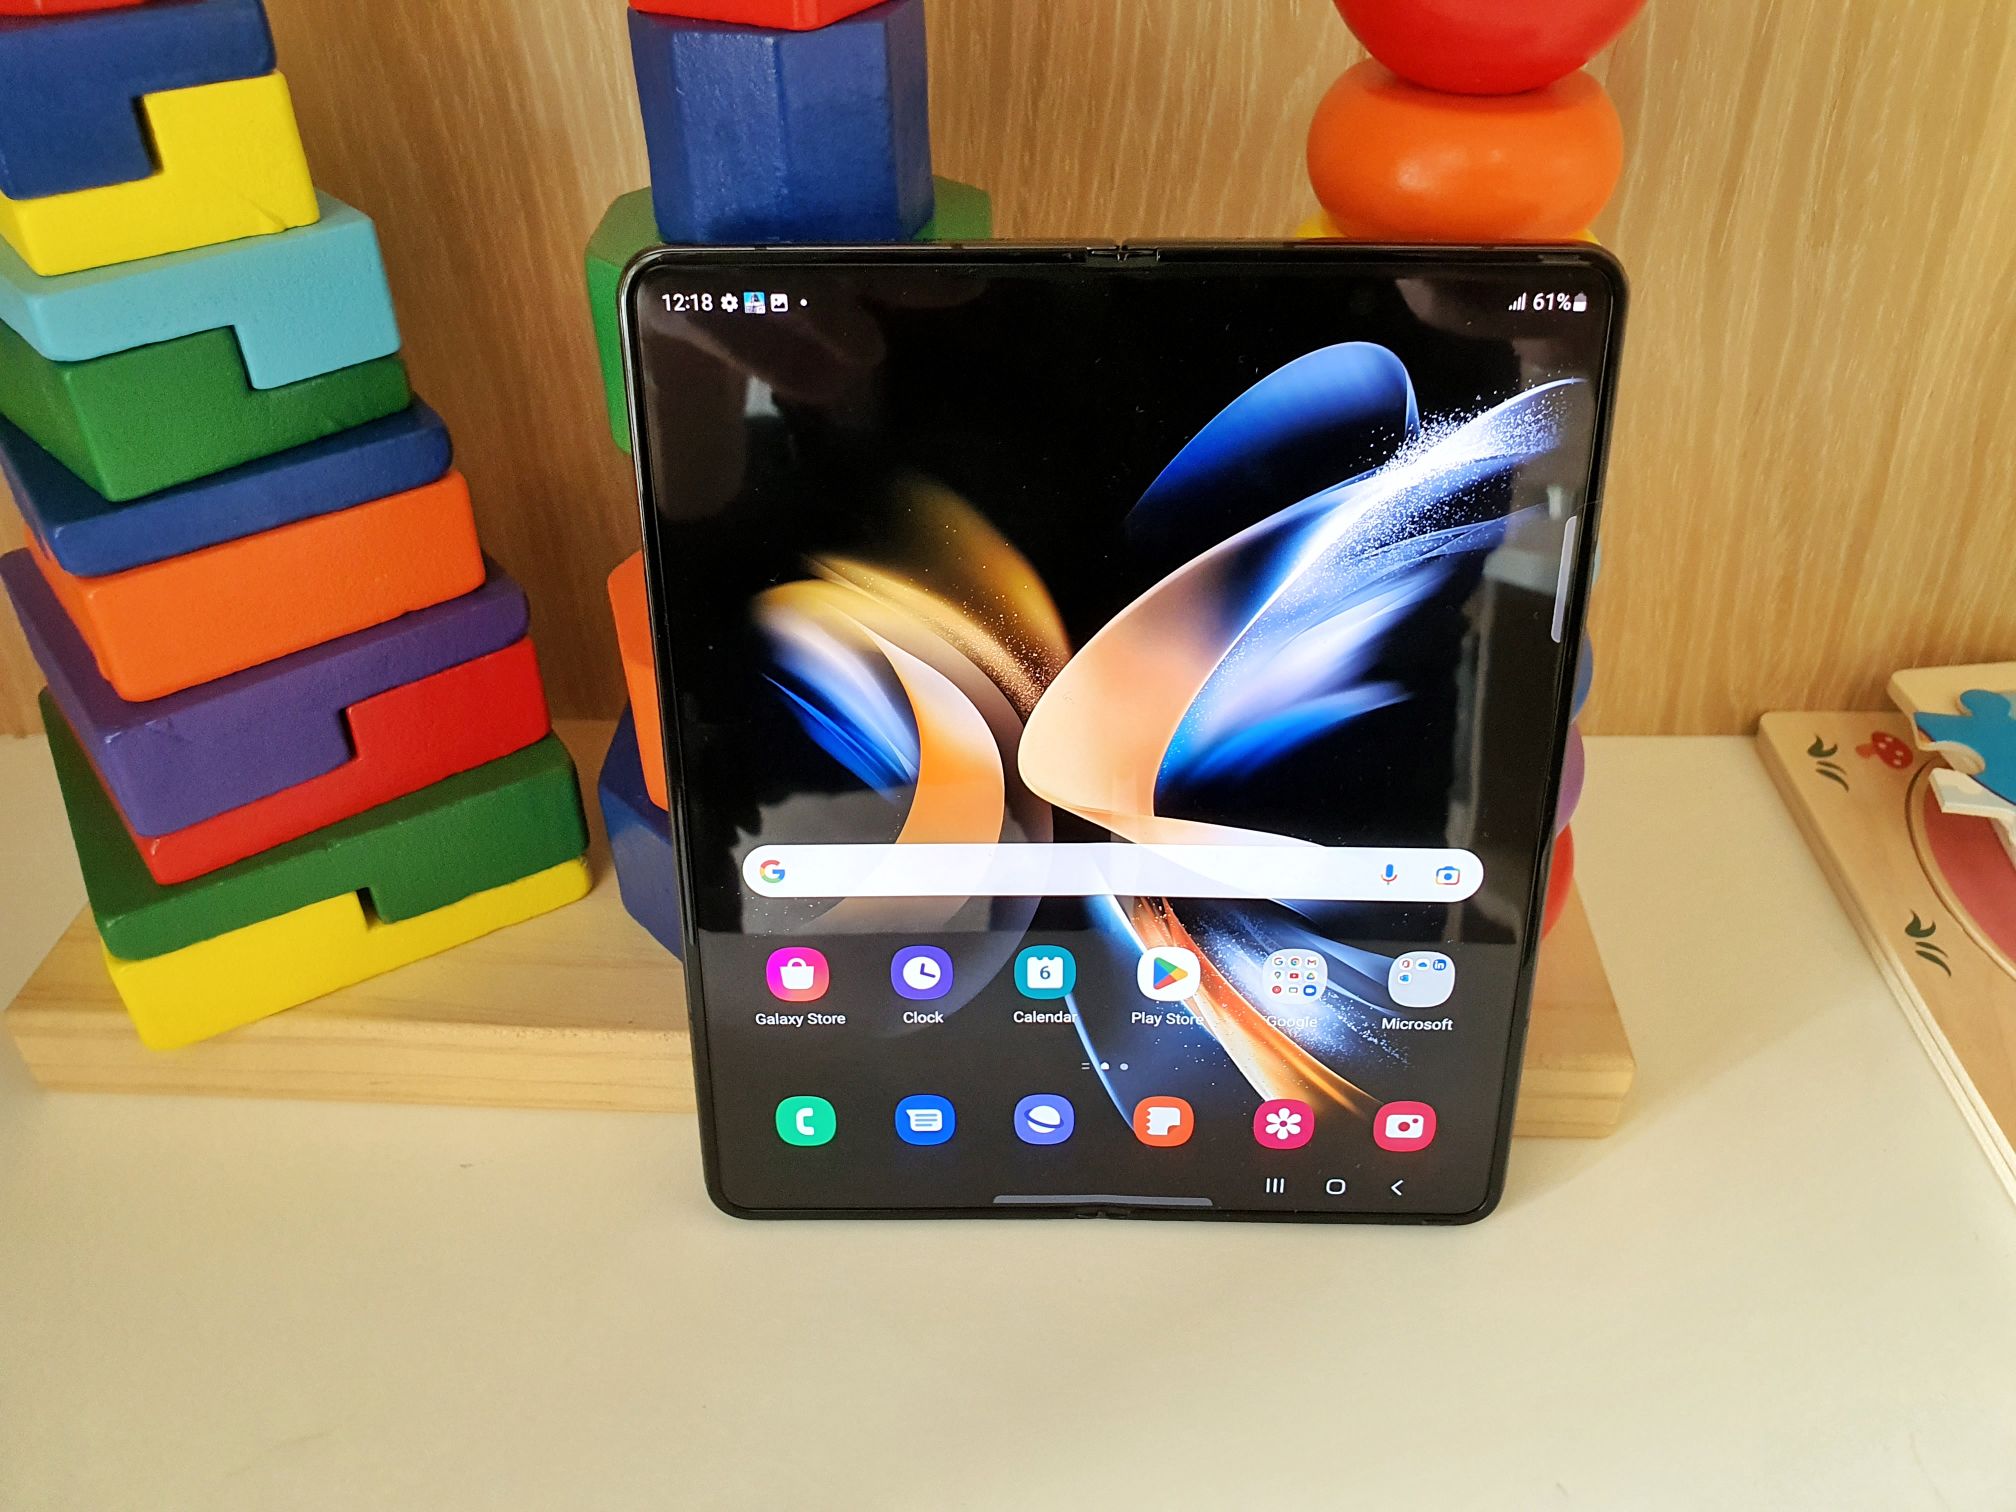 Samsung Galaxy Z Fold 4 review: Refined, but not reinvented